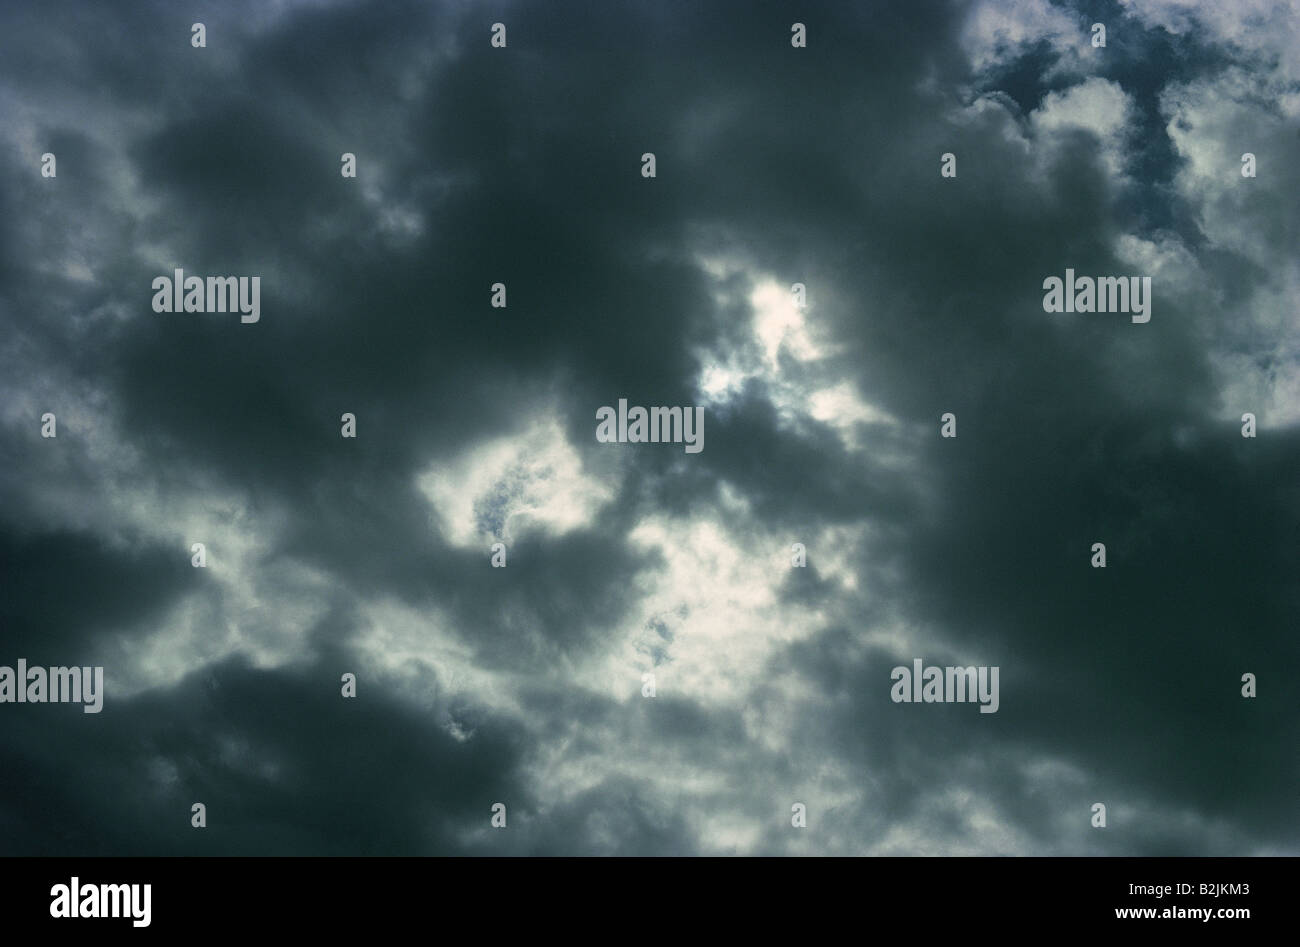 Stormy grey sky with heavy nimbostratus clouds. Stock Photo